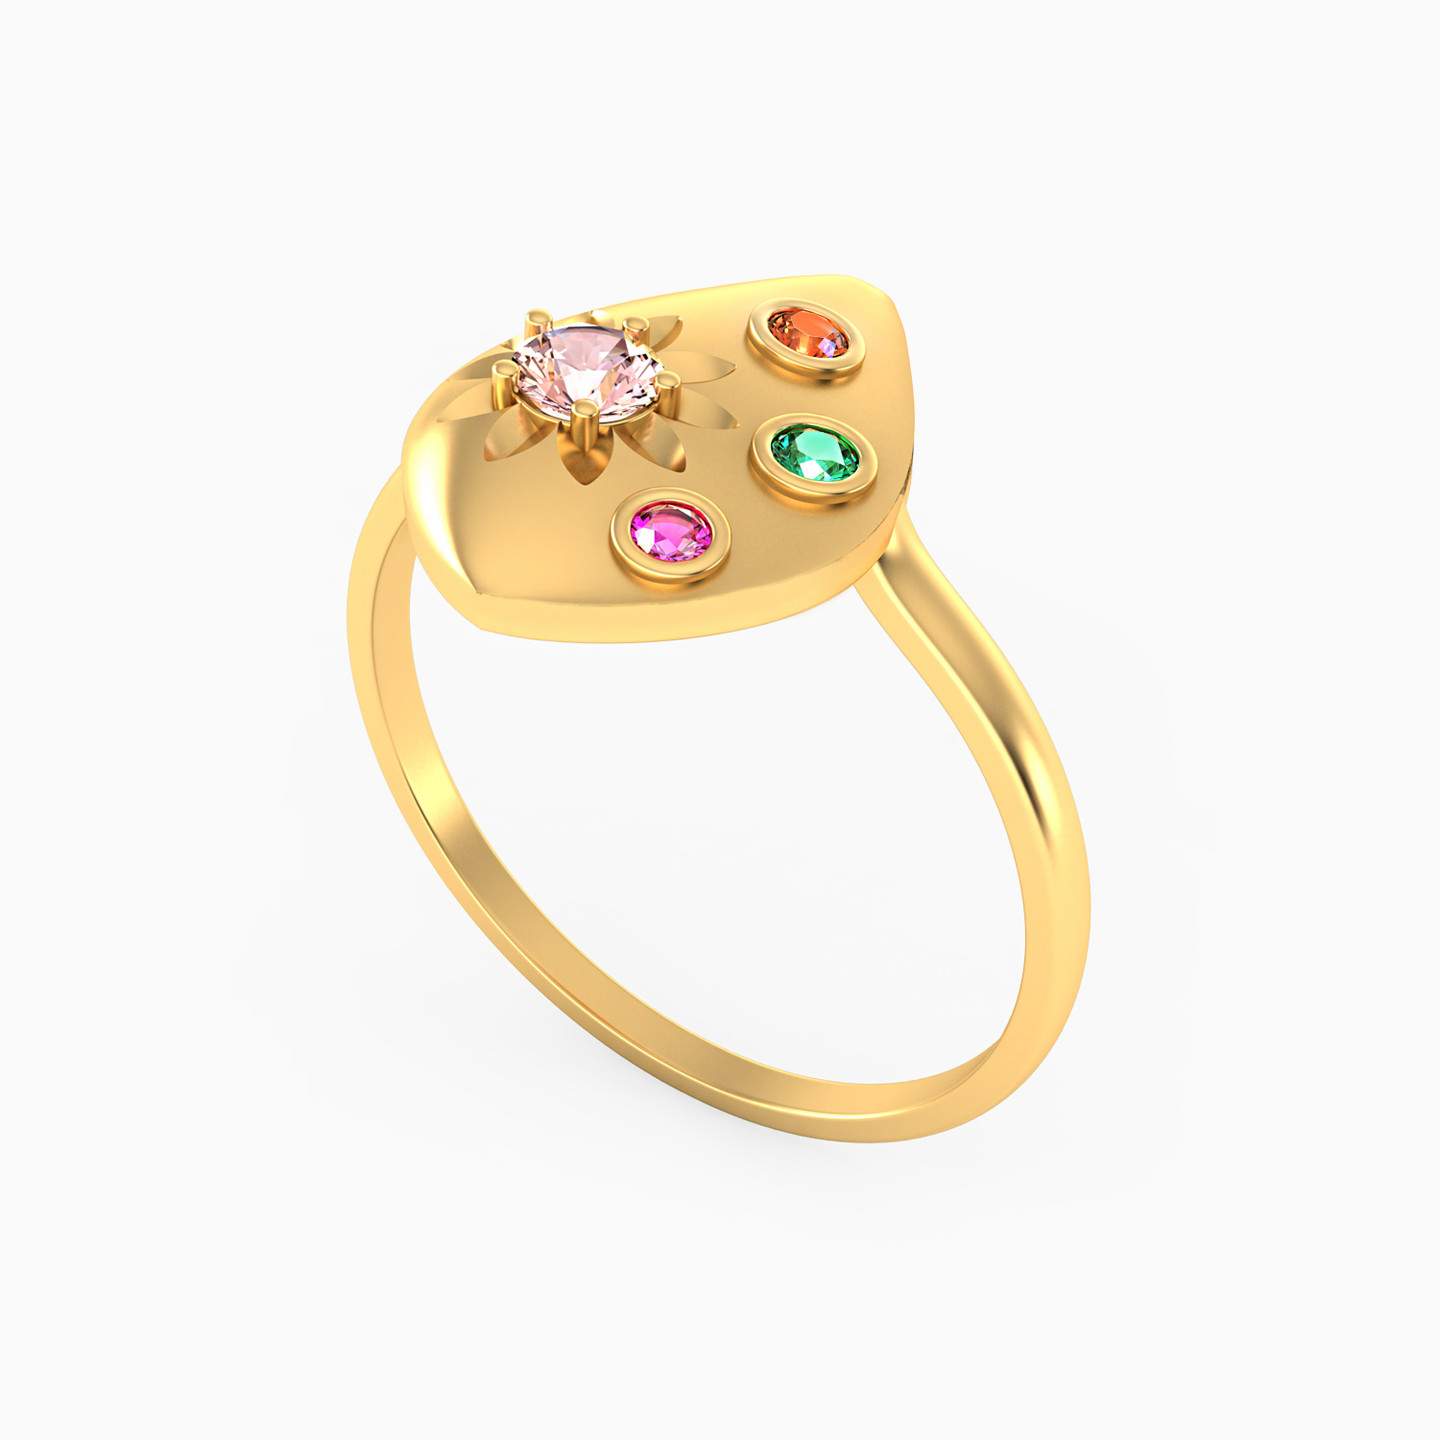 14K Gold Colored Stones Statement Ring - 2